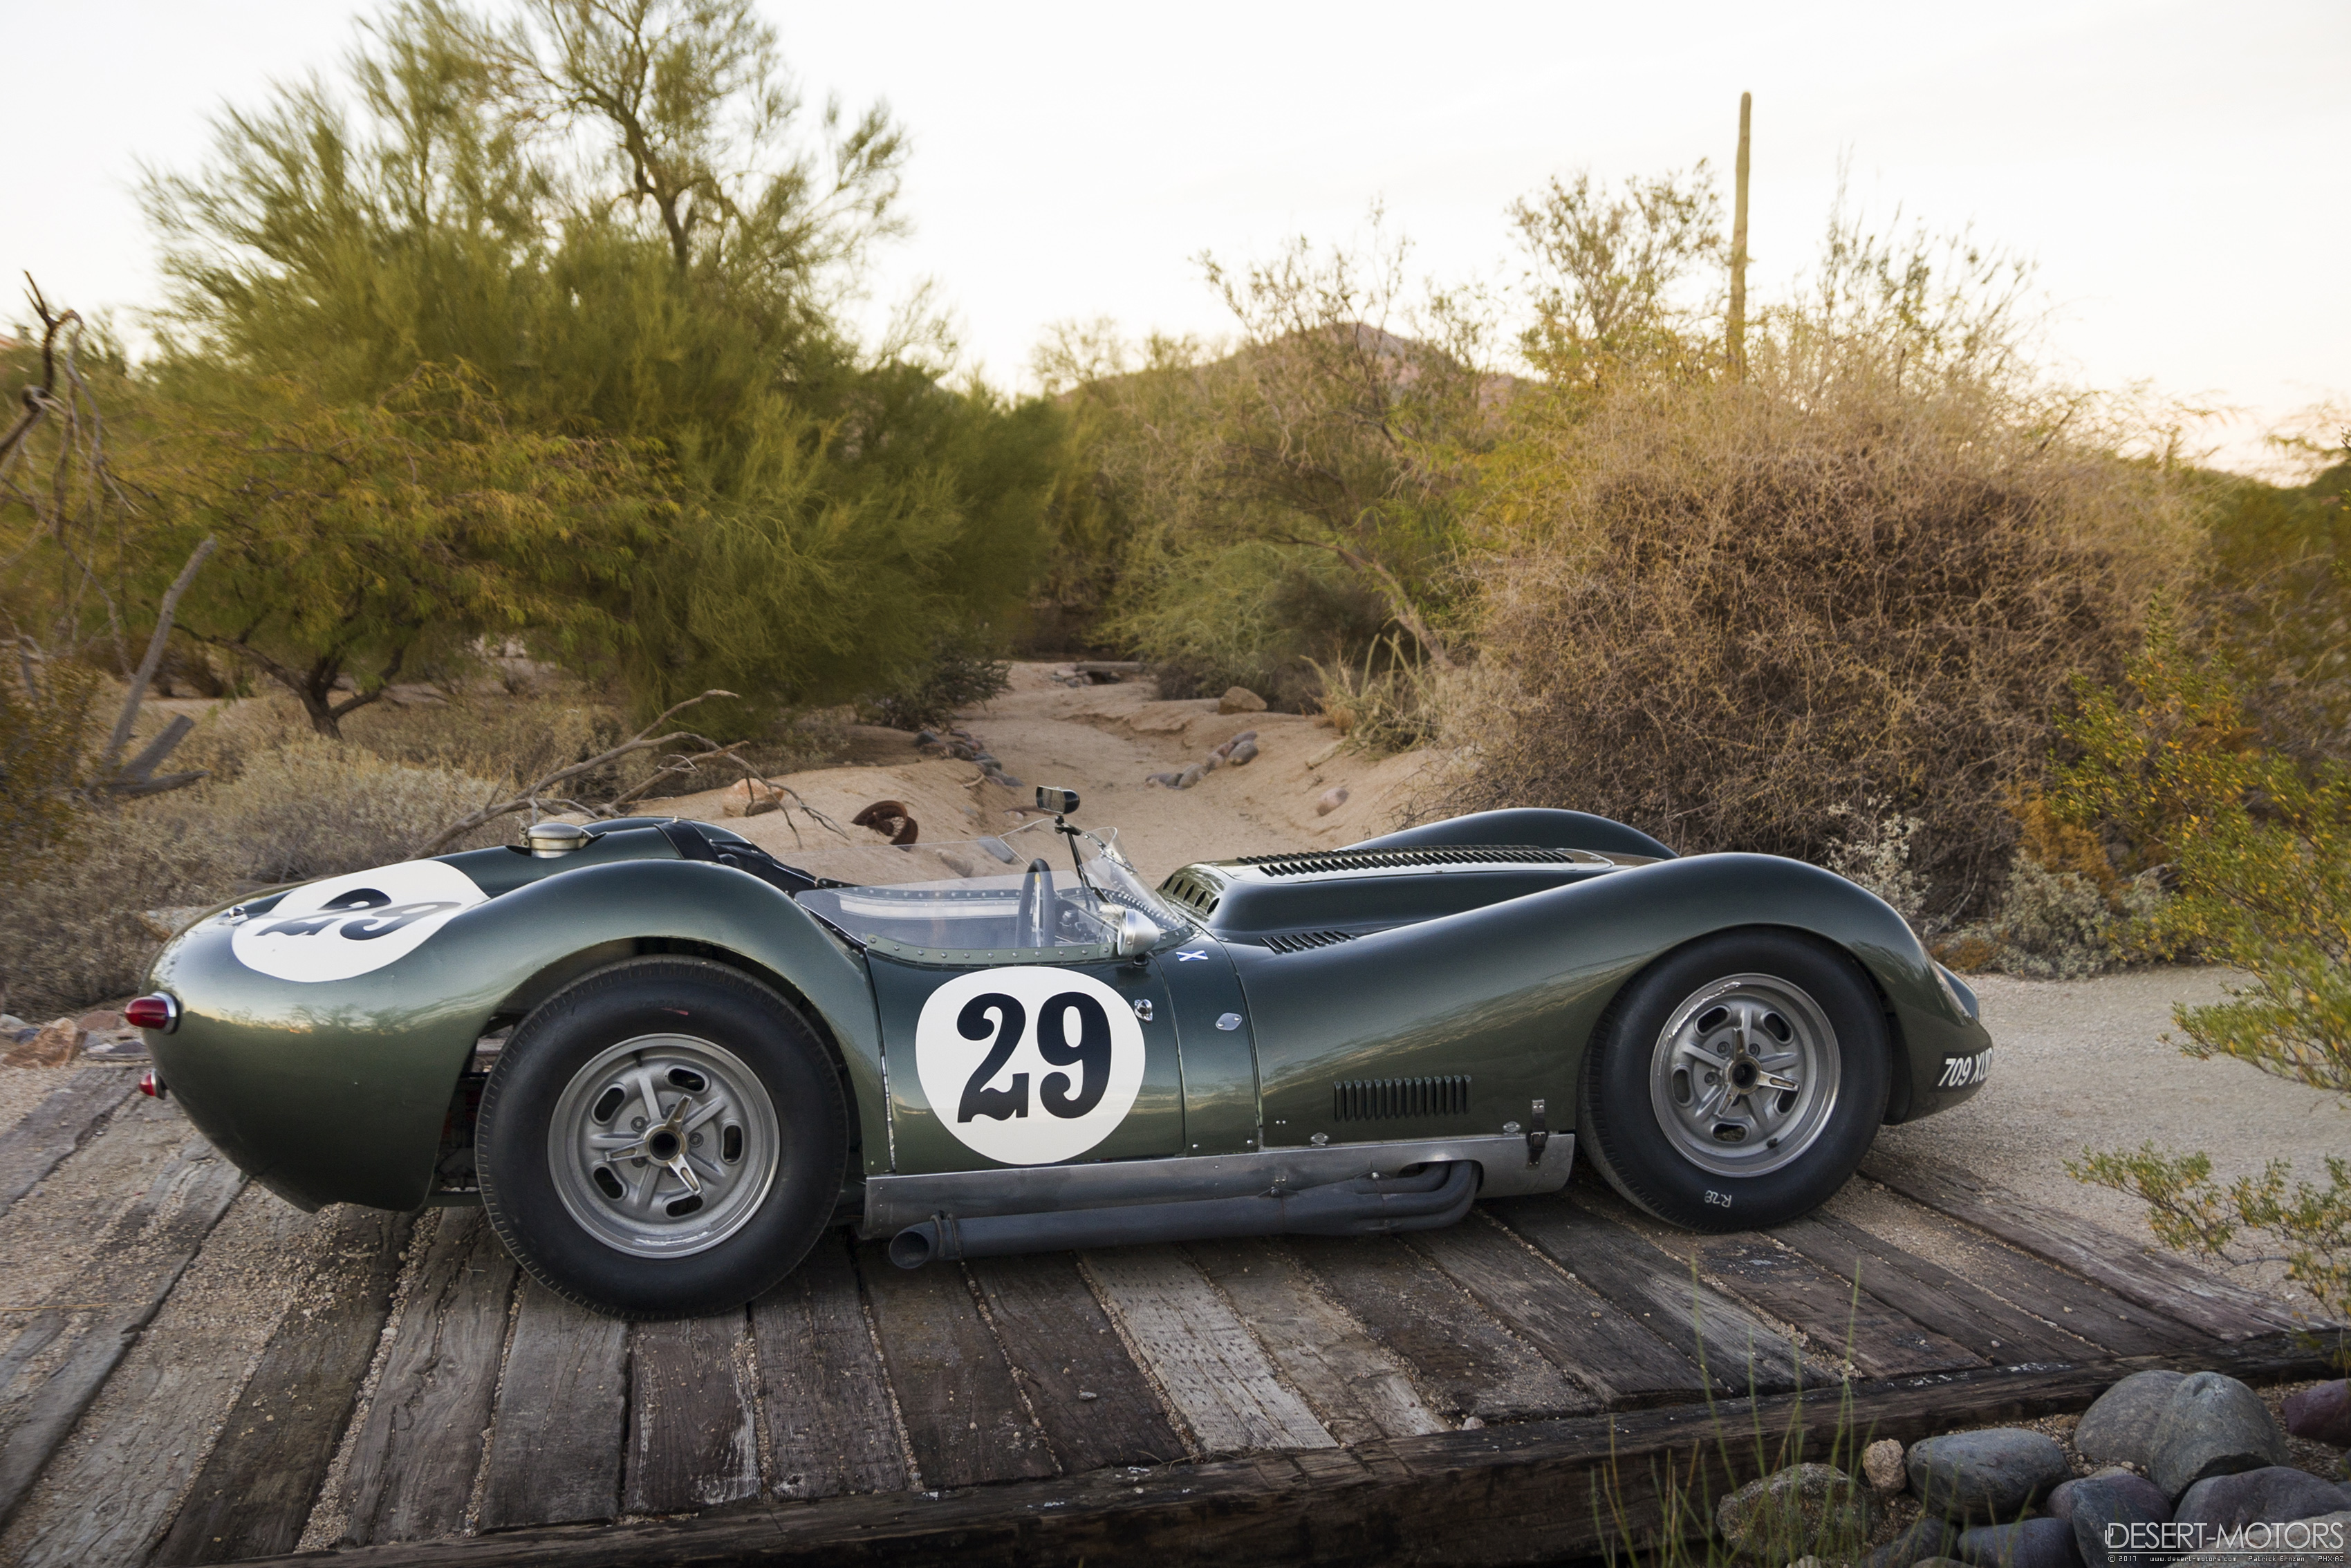 General 3400x2268 lister-chevrolet 1959 sports car classic car race cars green cars oldtimers car vehicle desert American cars